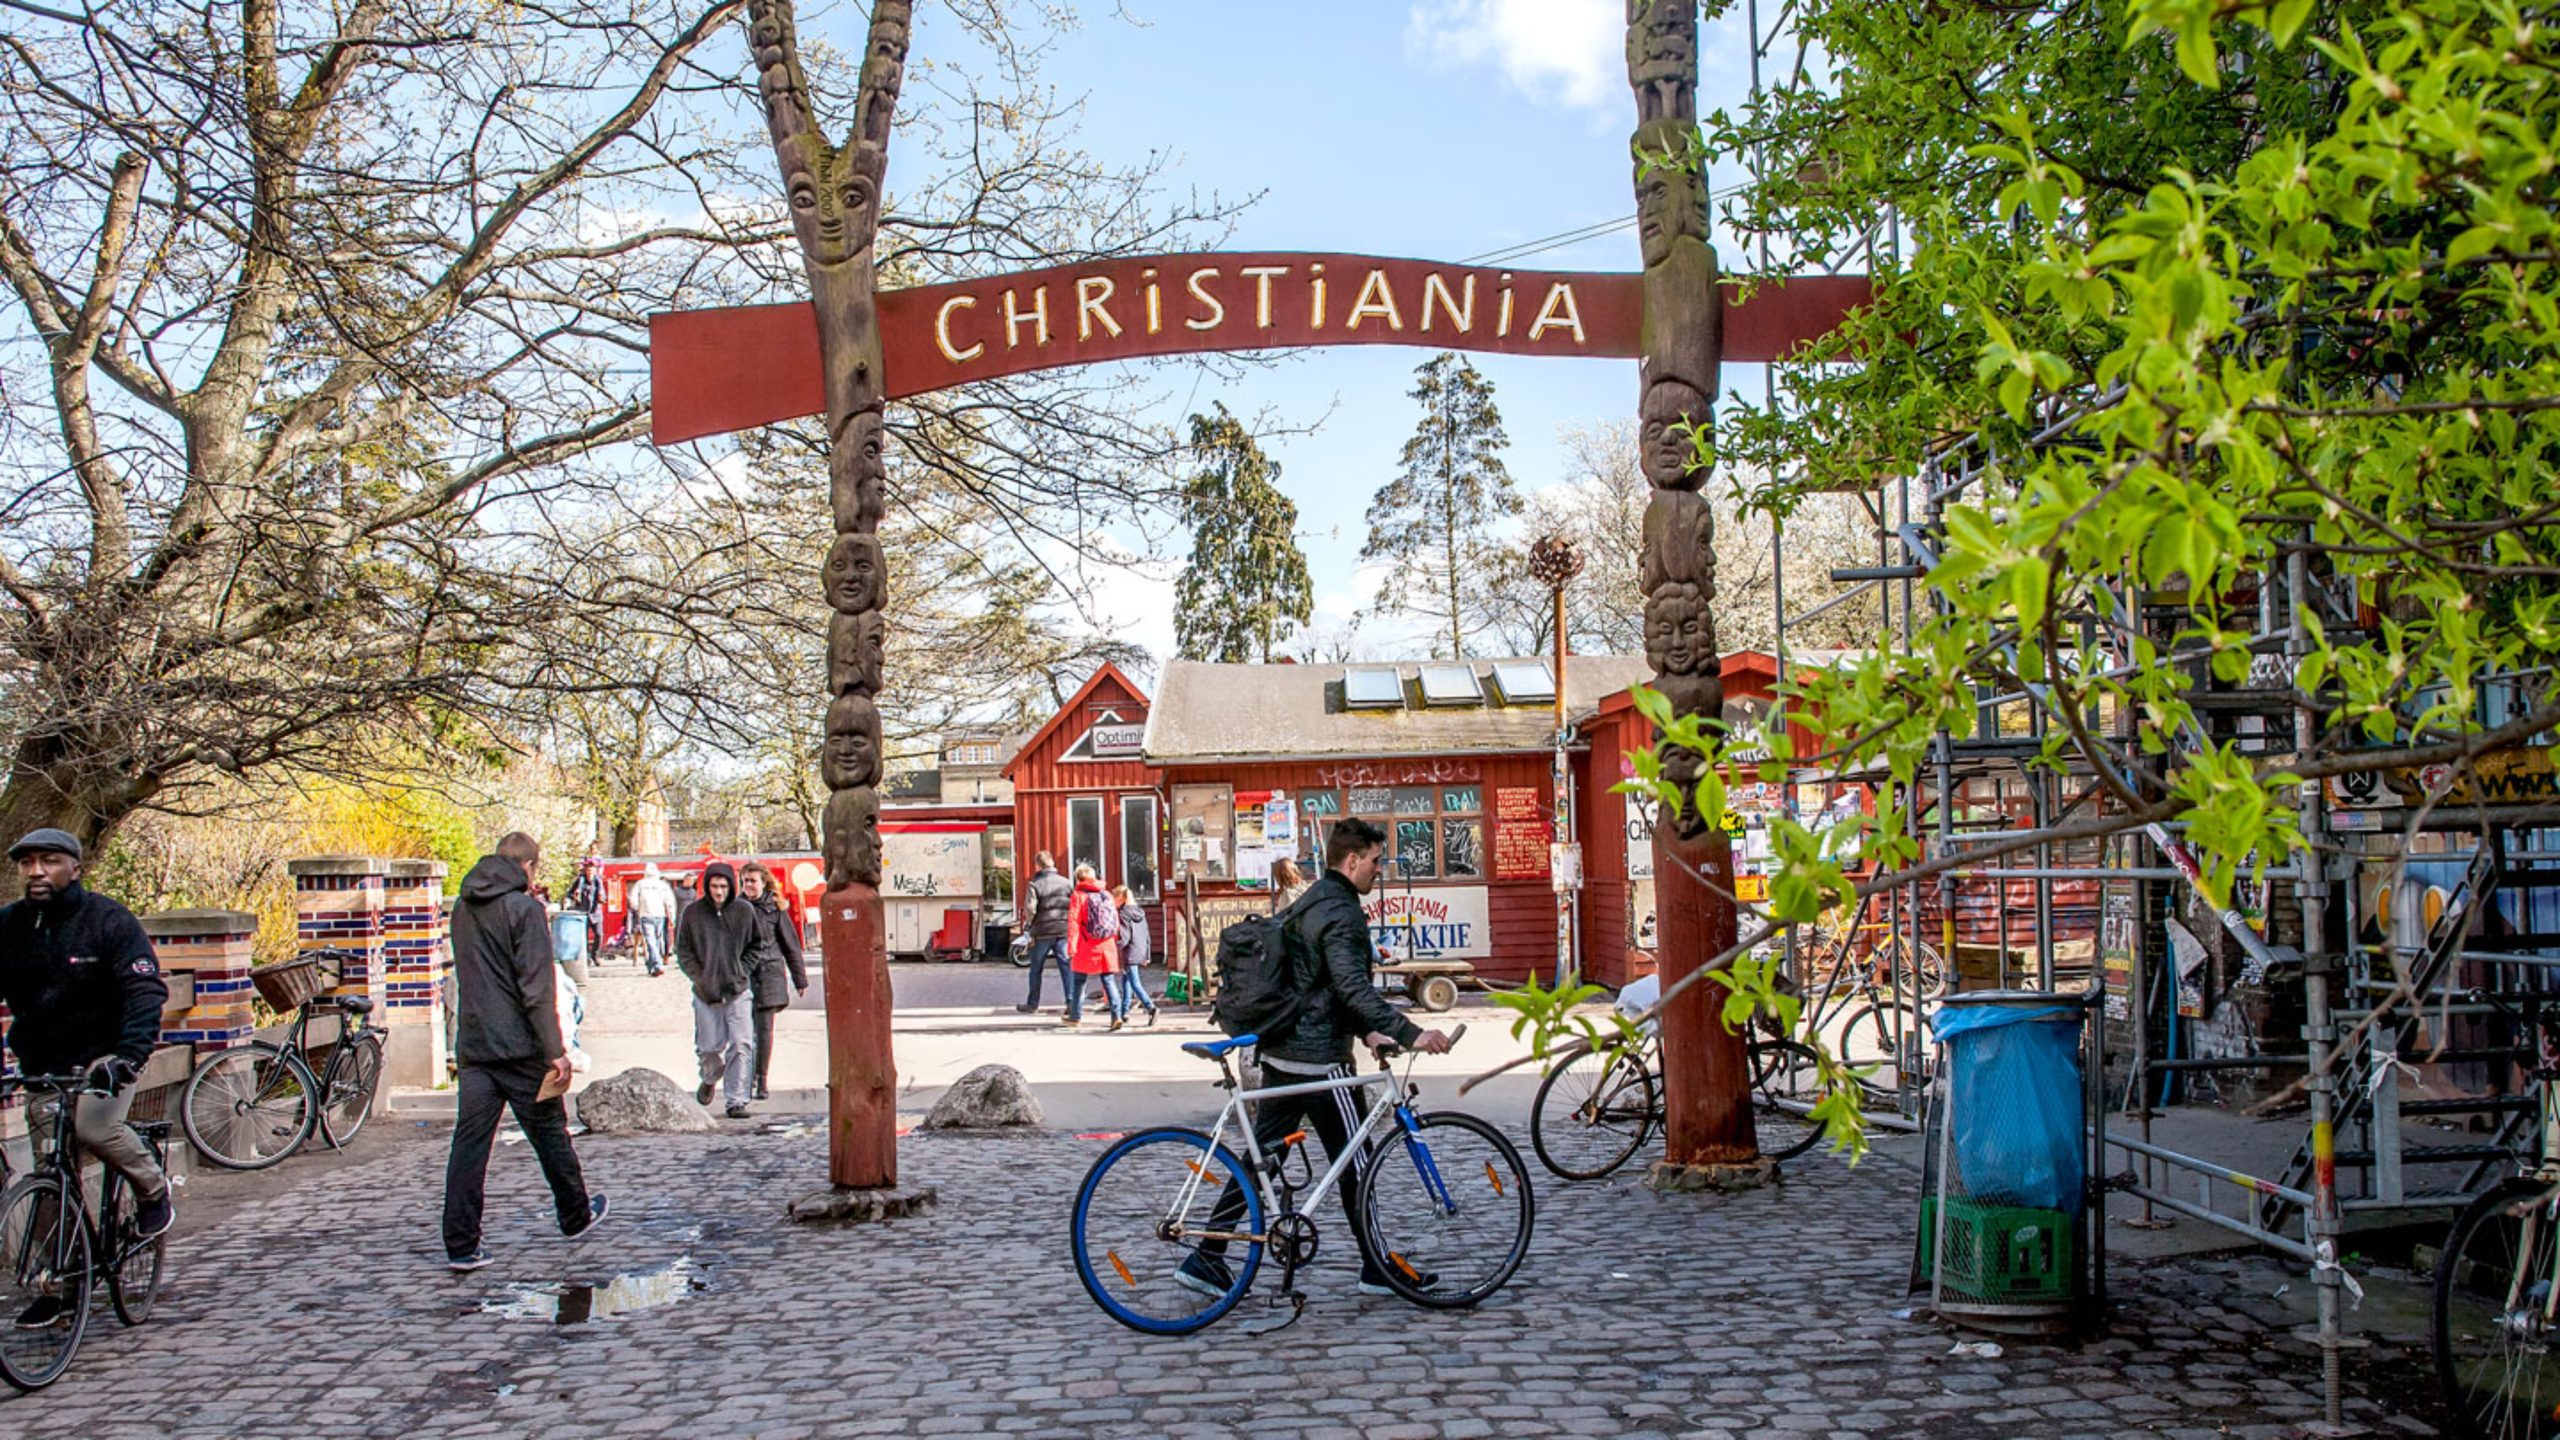 Explore Freetown Christiania - the tenth thing in the 10 best things to do in Denmark